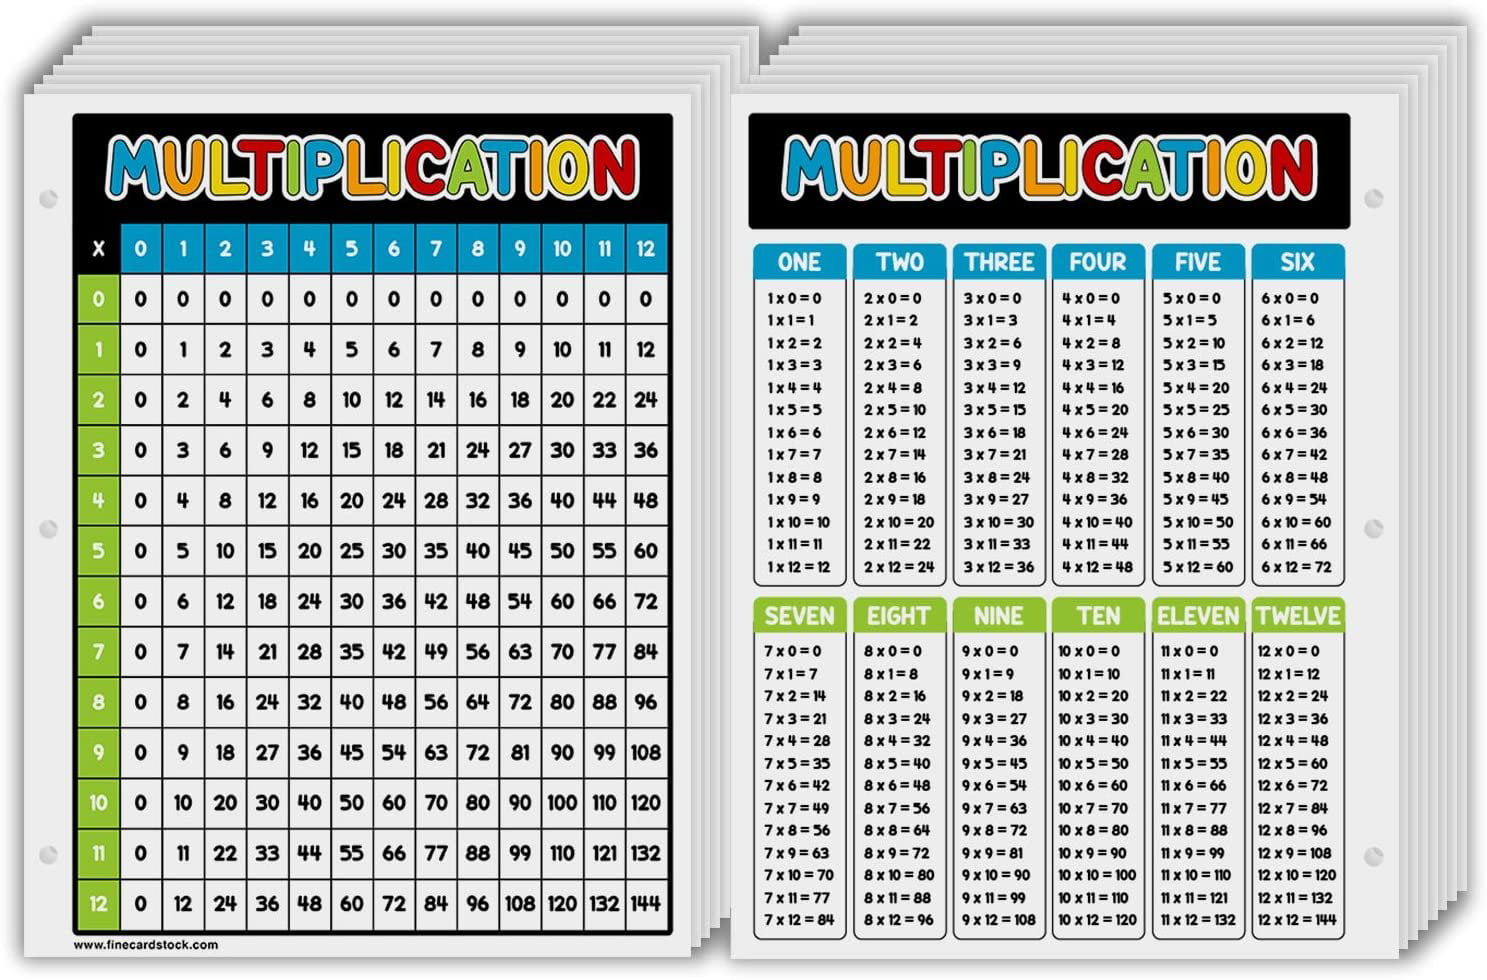 Great Educational Aid for Learning at Home and School 3 Hole Punched Double Sided on Sturdy Laminated Card Stock 8.5 x 11 10 per Pack Dynamico Laminated Multiplication Chart Math Table Poster 